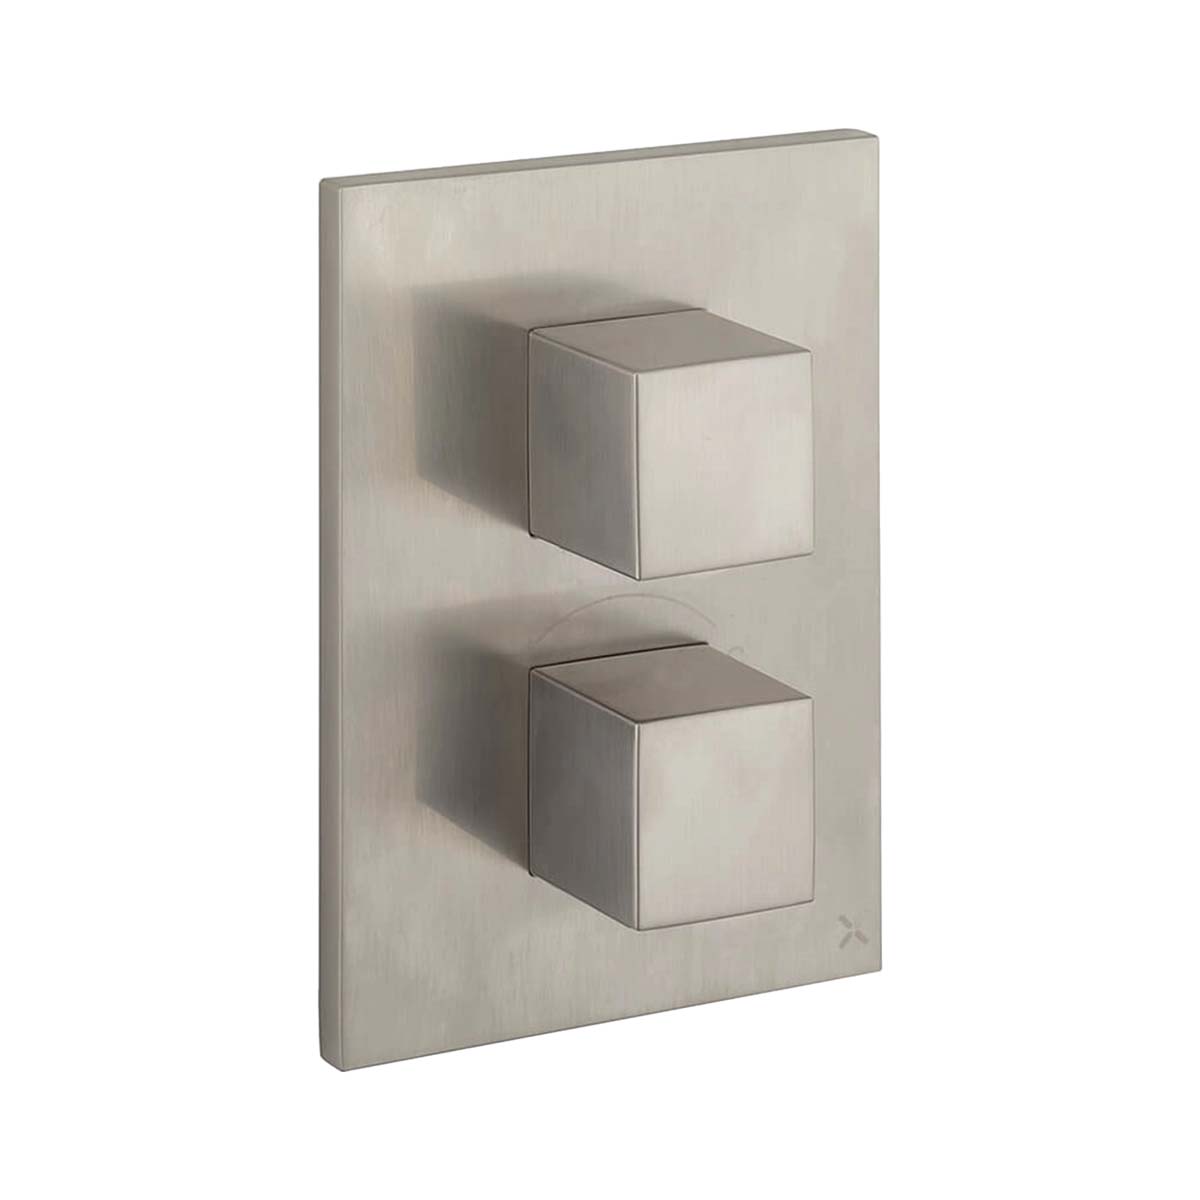 Crosswater Verge Crossbox 2 Outlet Shower Valve Brushed Stainless Steel Effect